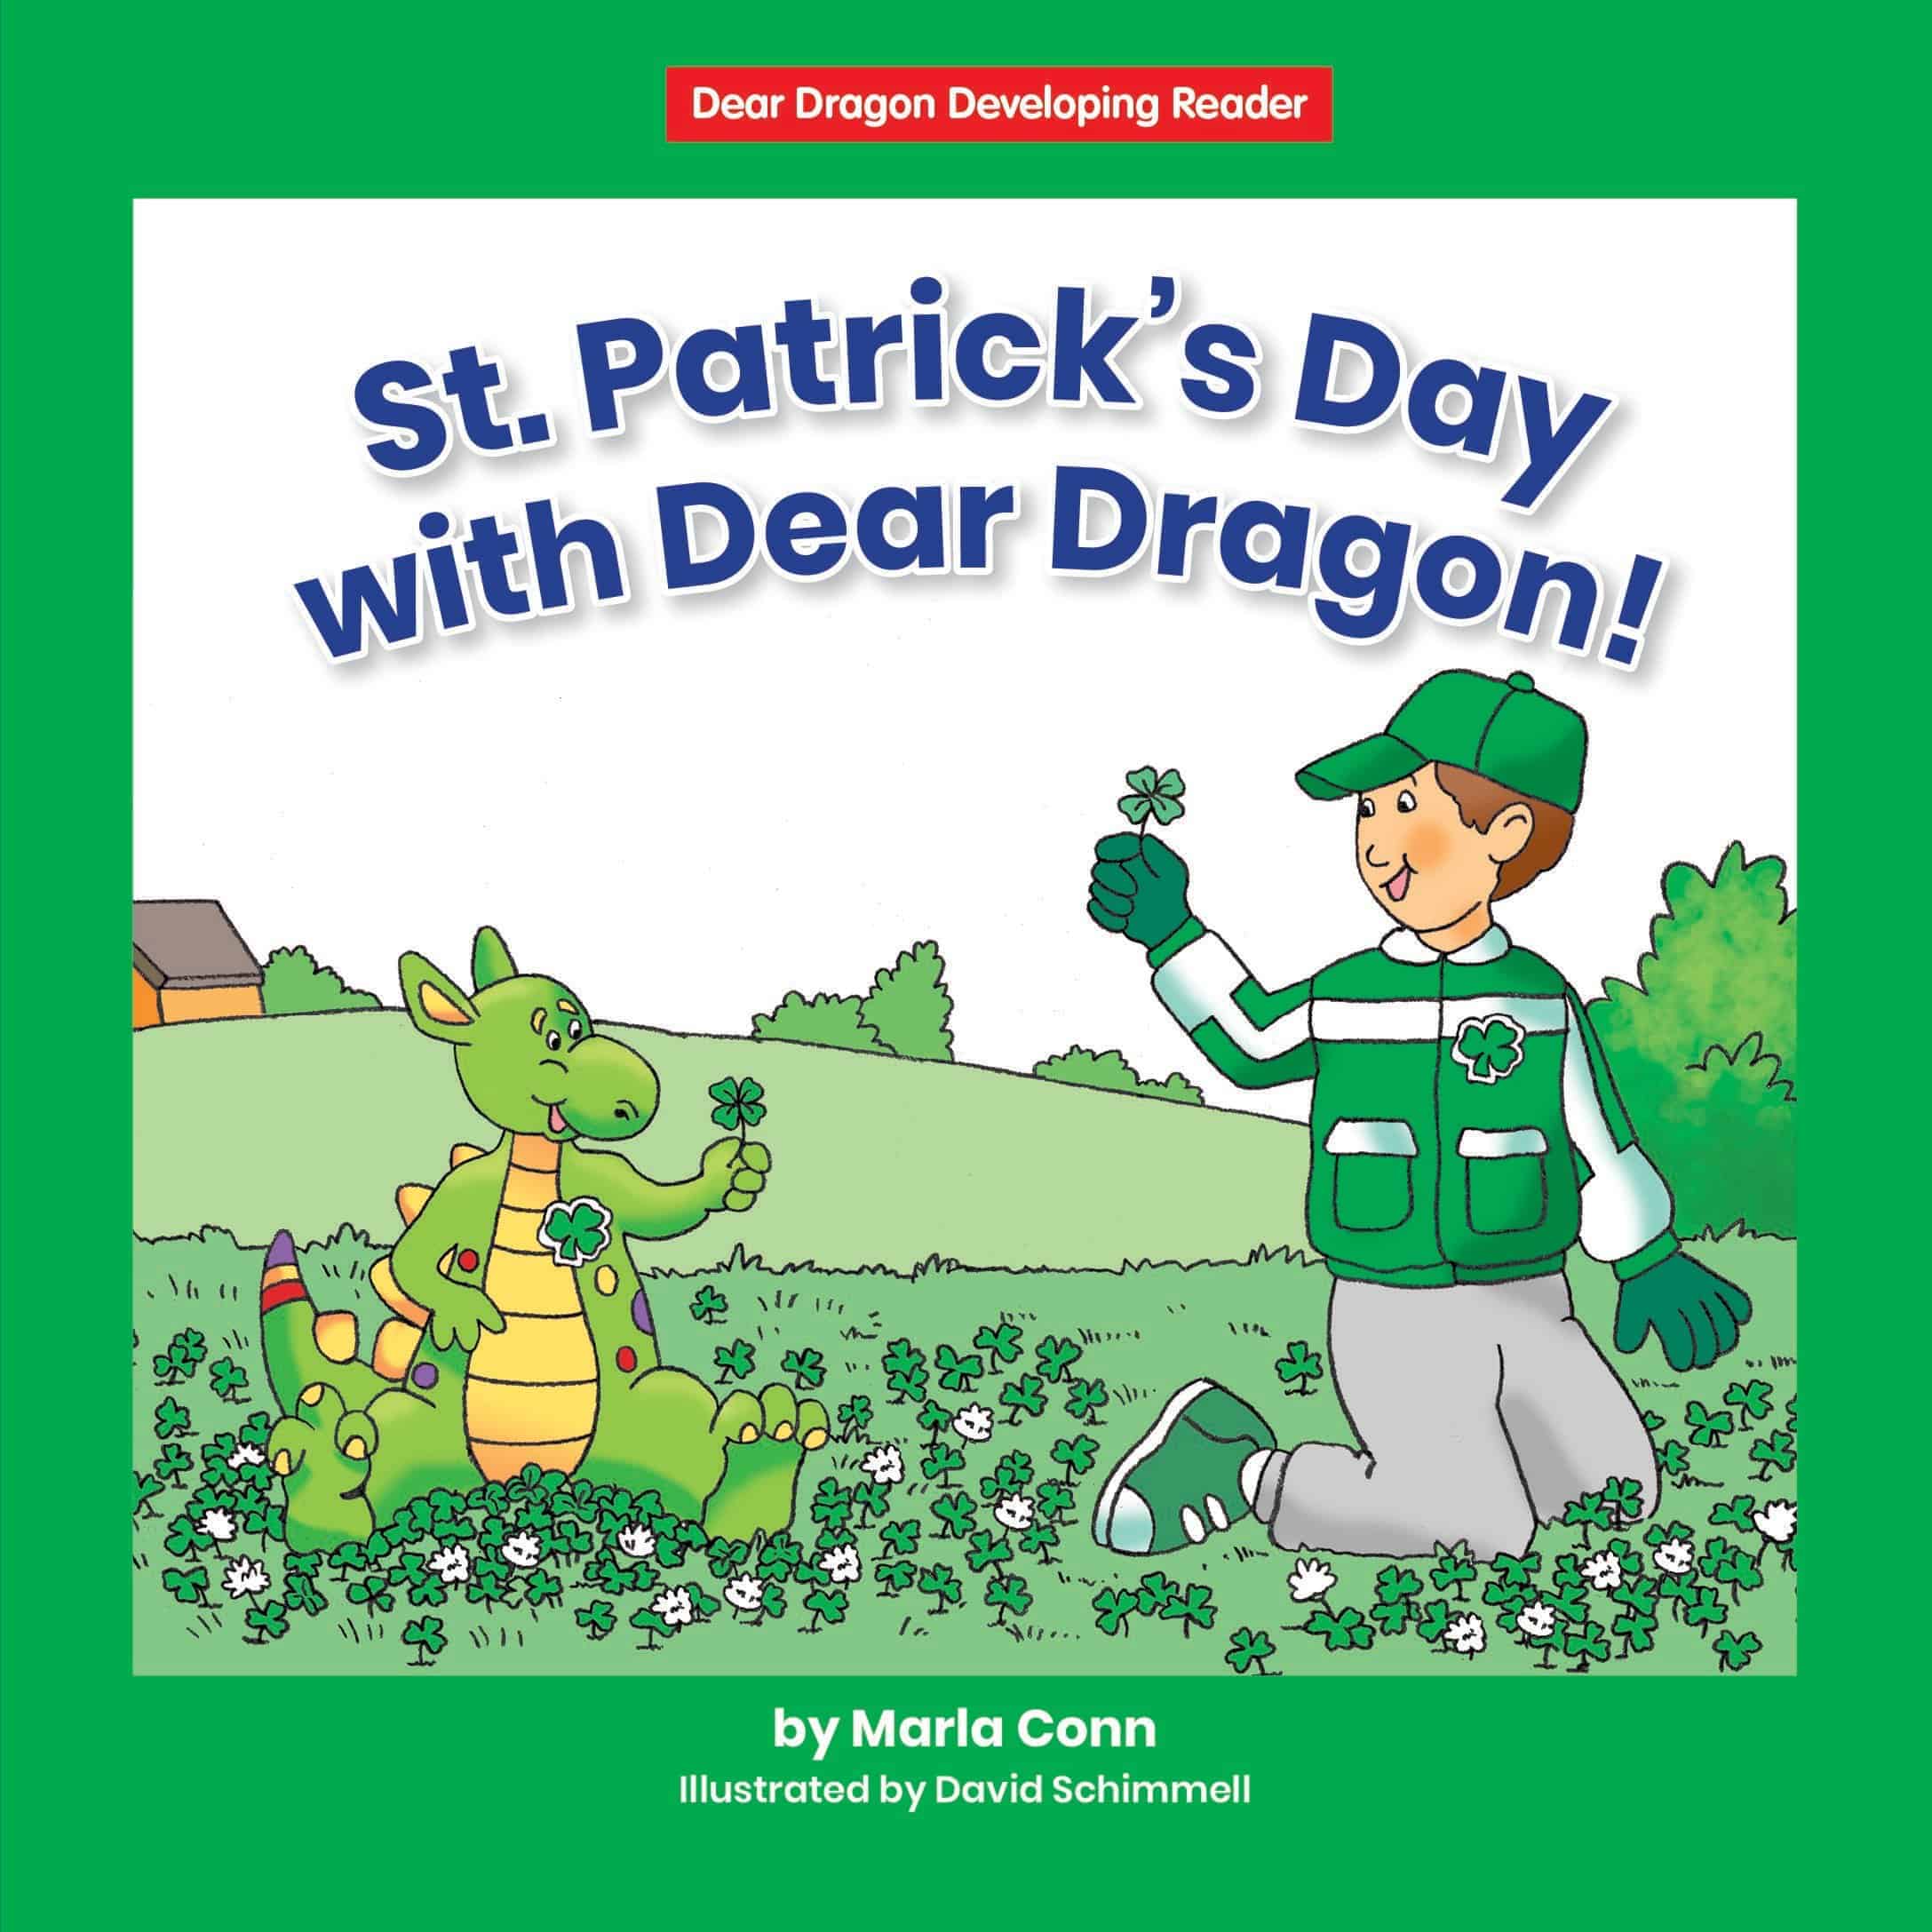 St. Patrick's Day with Dear Dragon! (Level D)